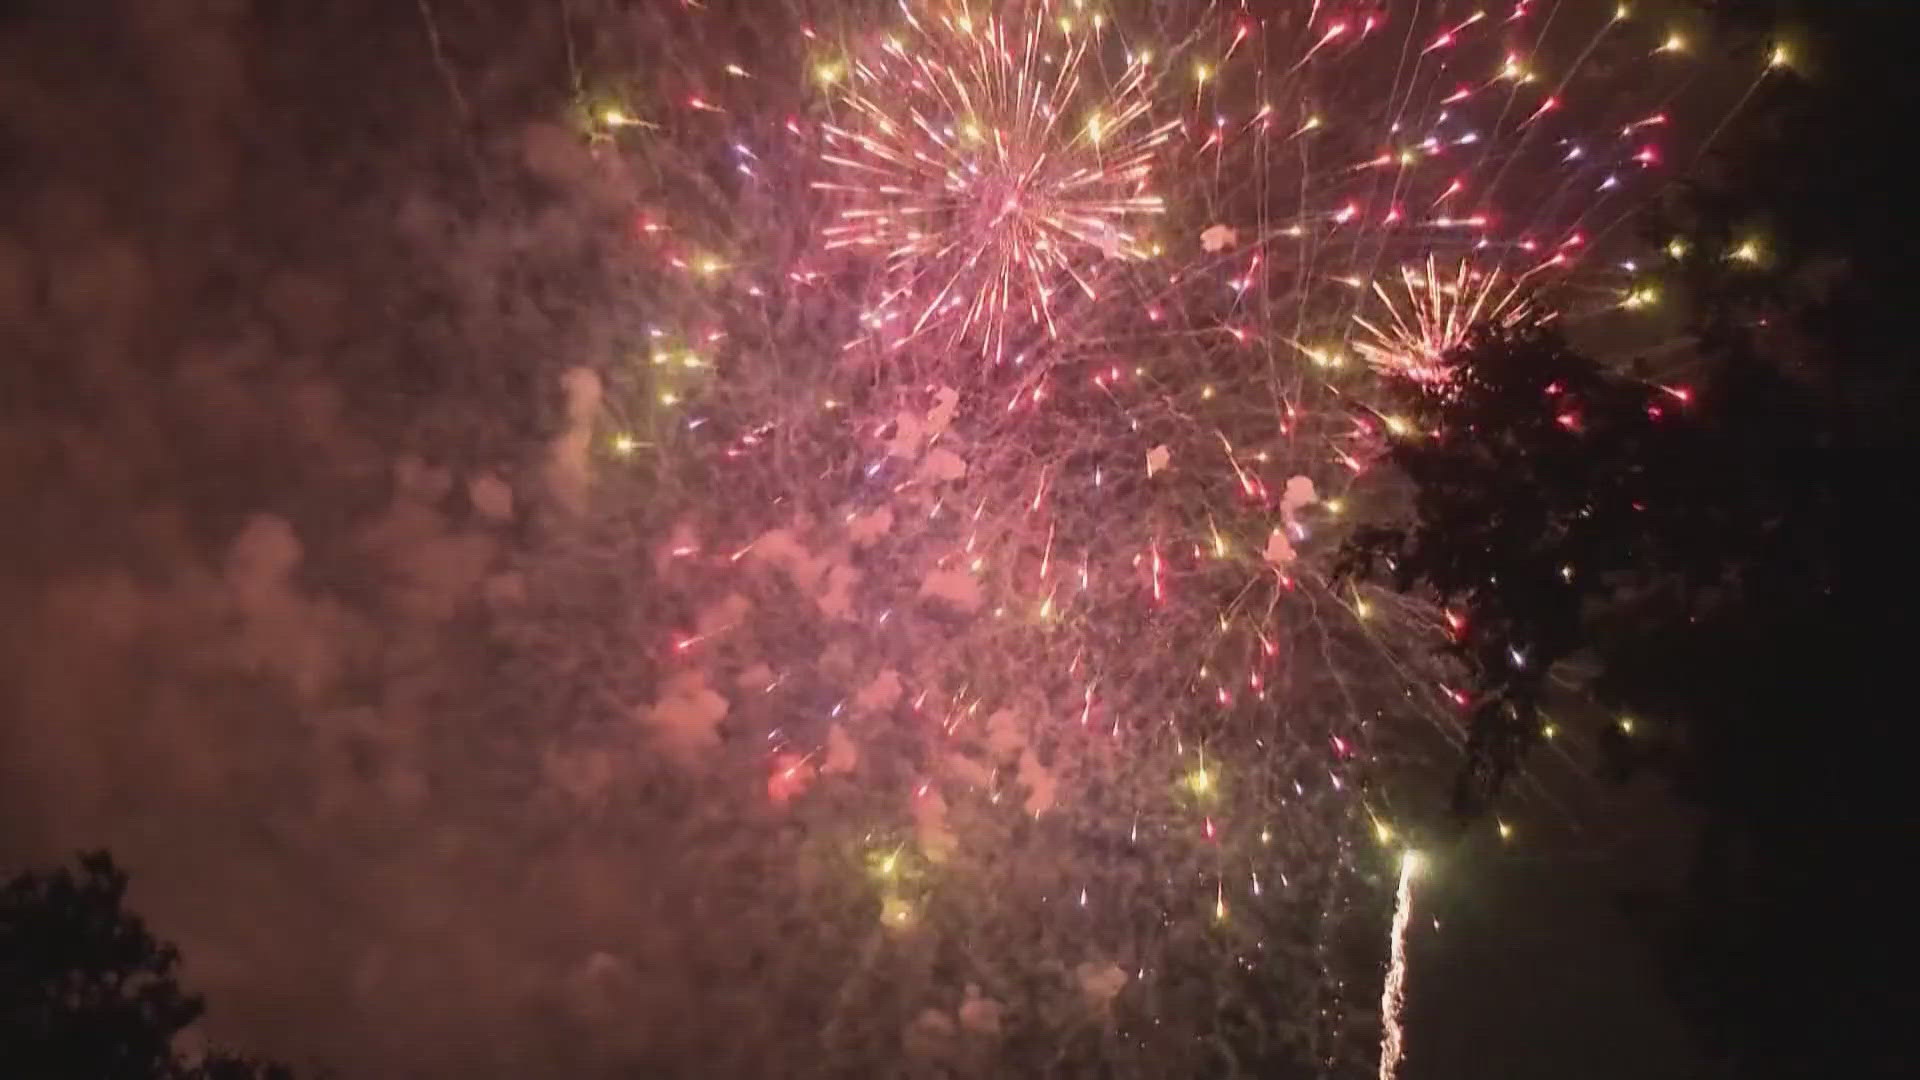 Fire crews had a busy night keeping up with fireworks and fires across the Sacramento region.